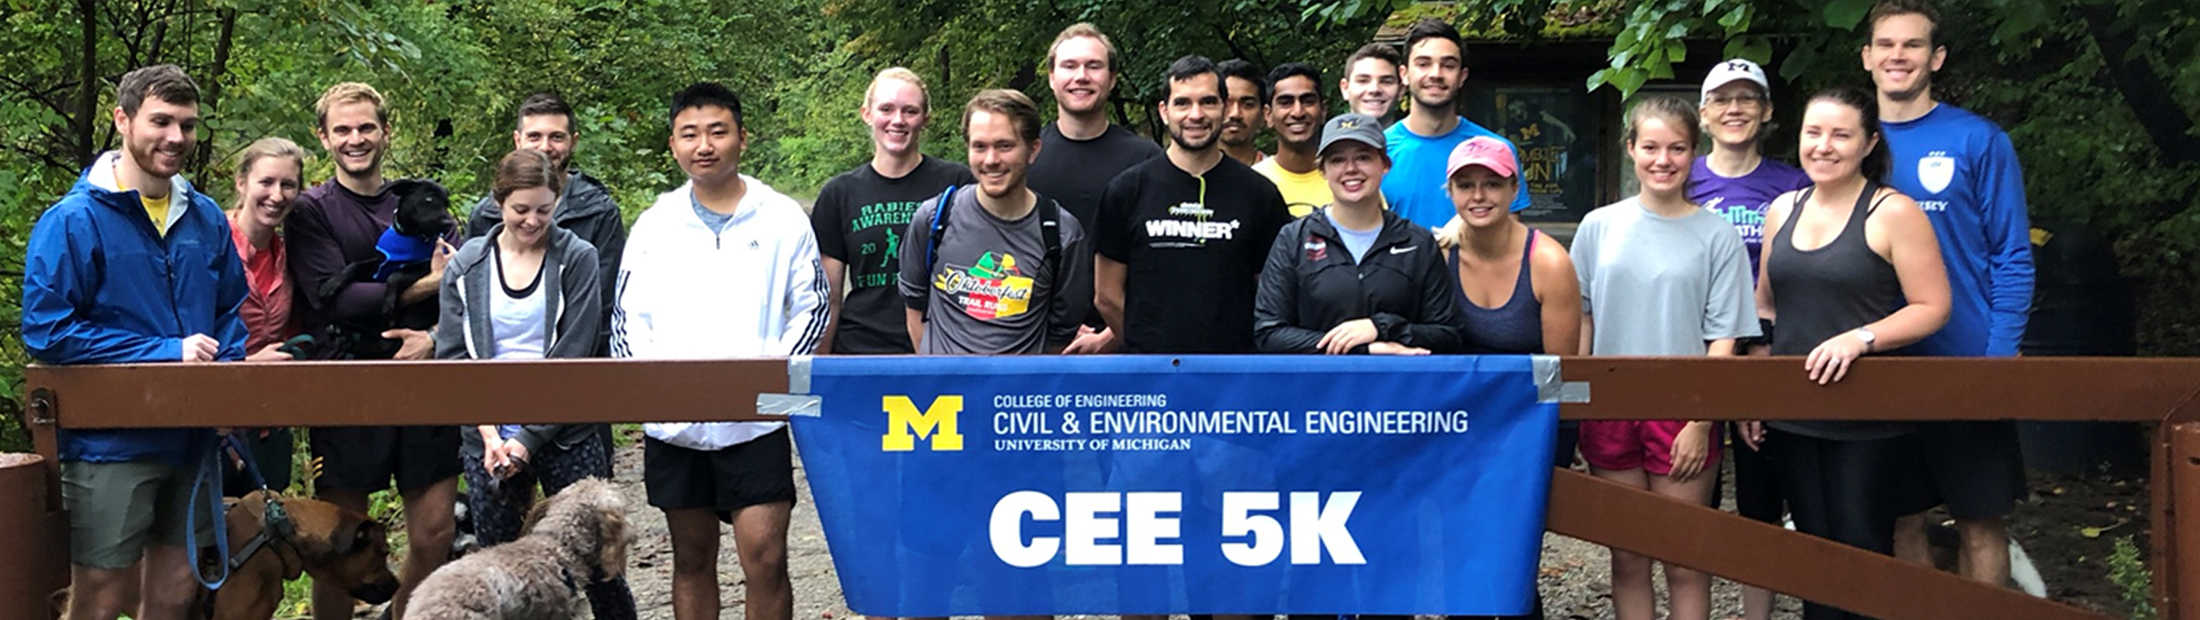 Featured group image of CEE 5k event